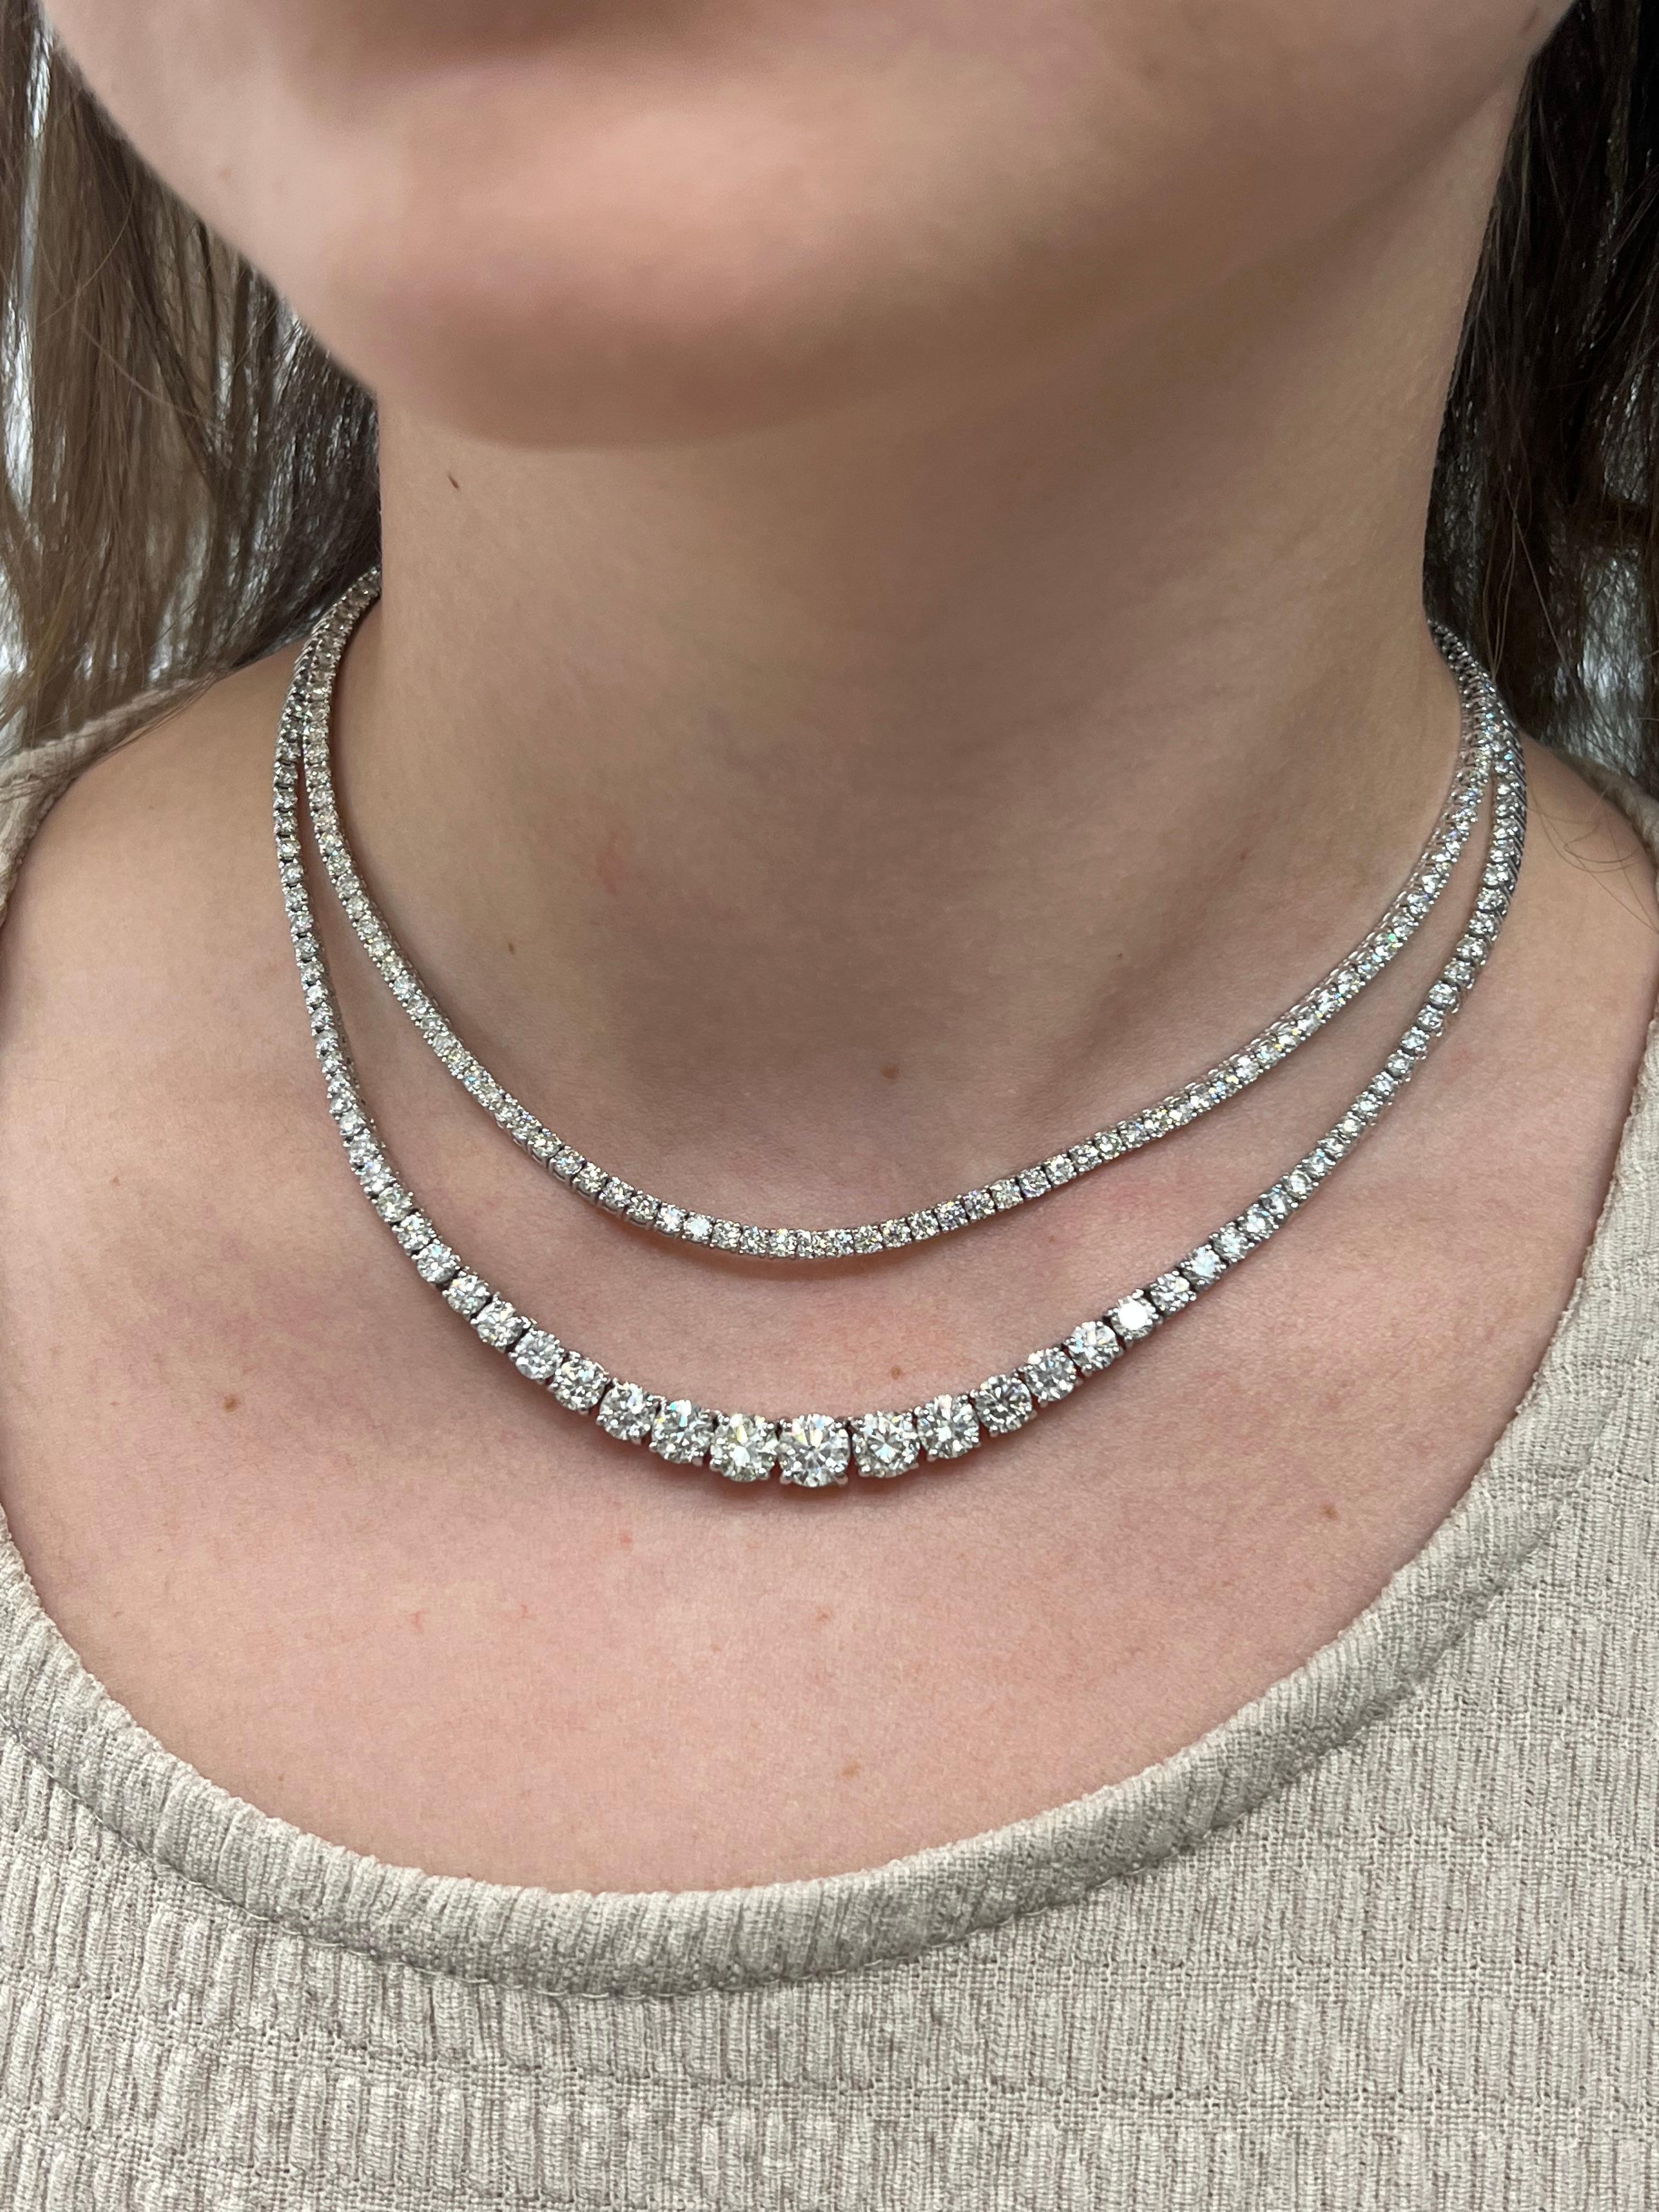 This Classic Graduated Diamond Tennis Necklace is a head-turner. The elegance of this piece will make your chest glow and sparkle with diamonds. Each stone is set with precision to allow maximum brilliance of the stones to help you keep